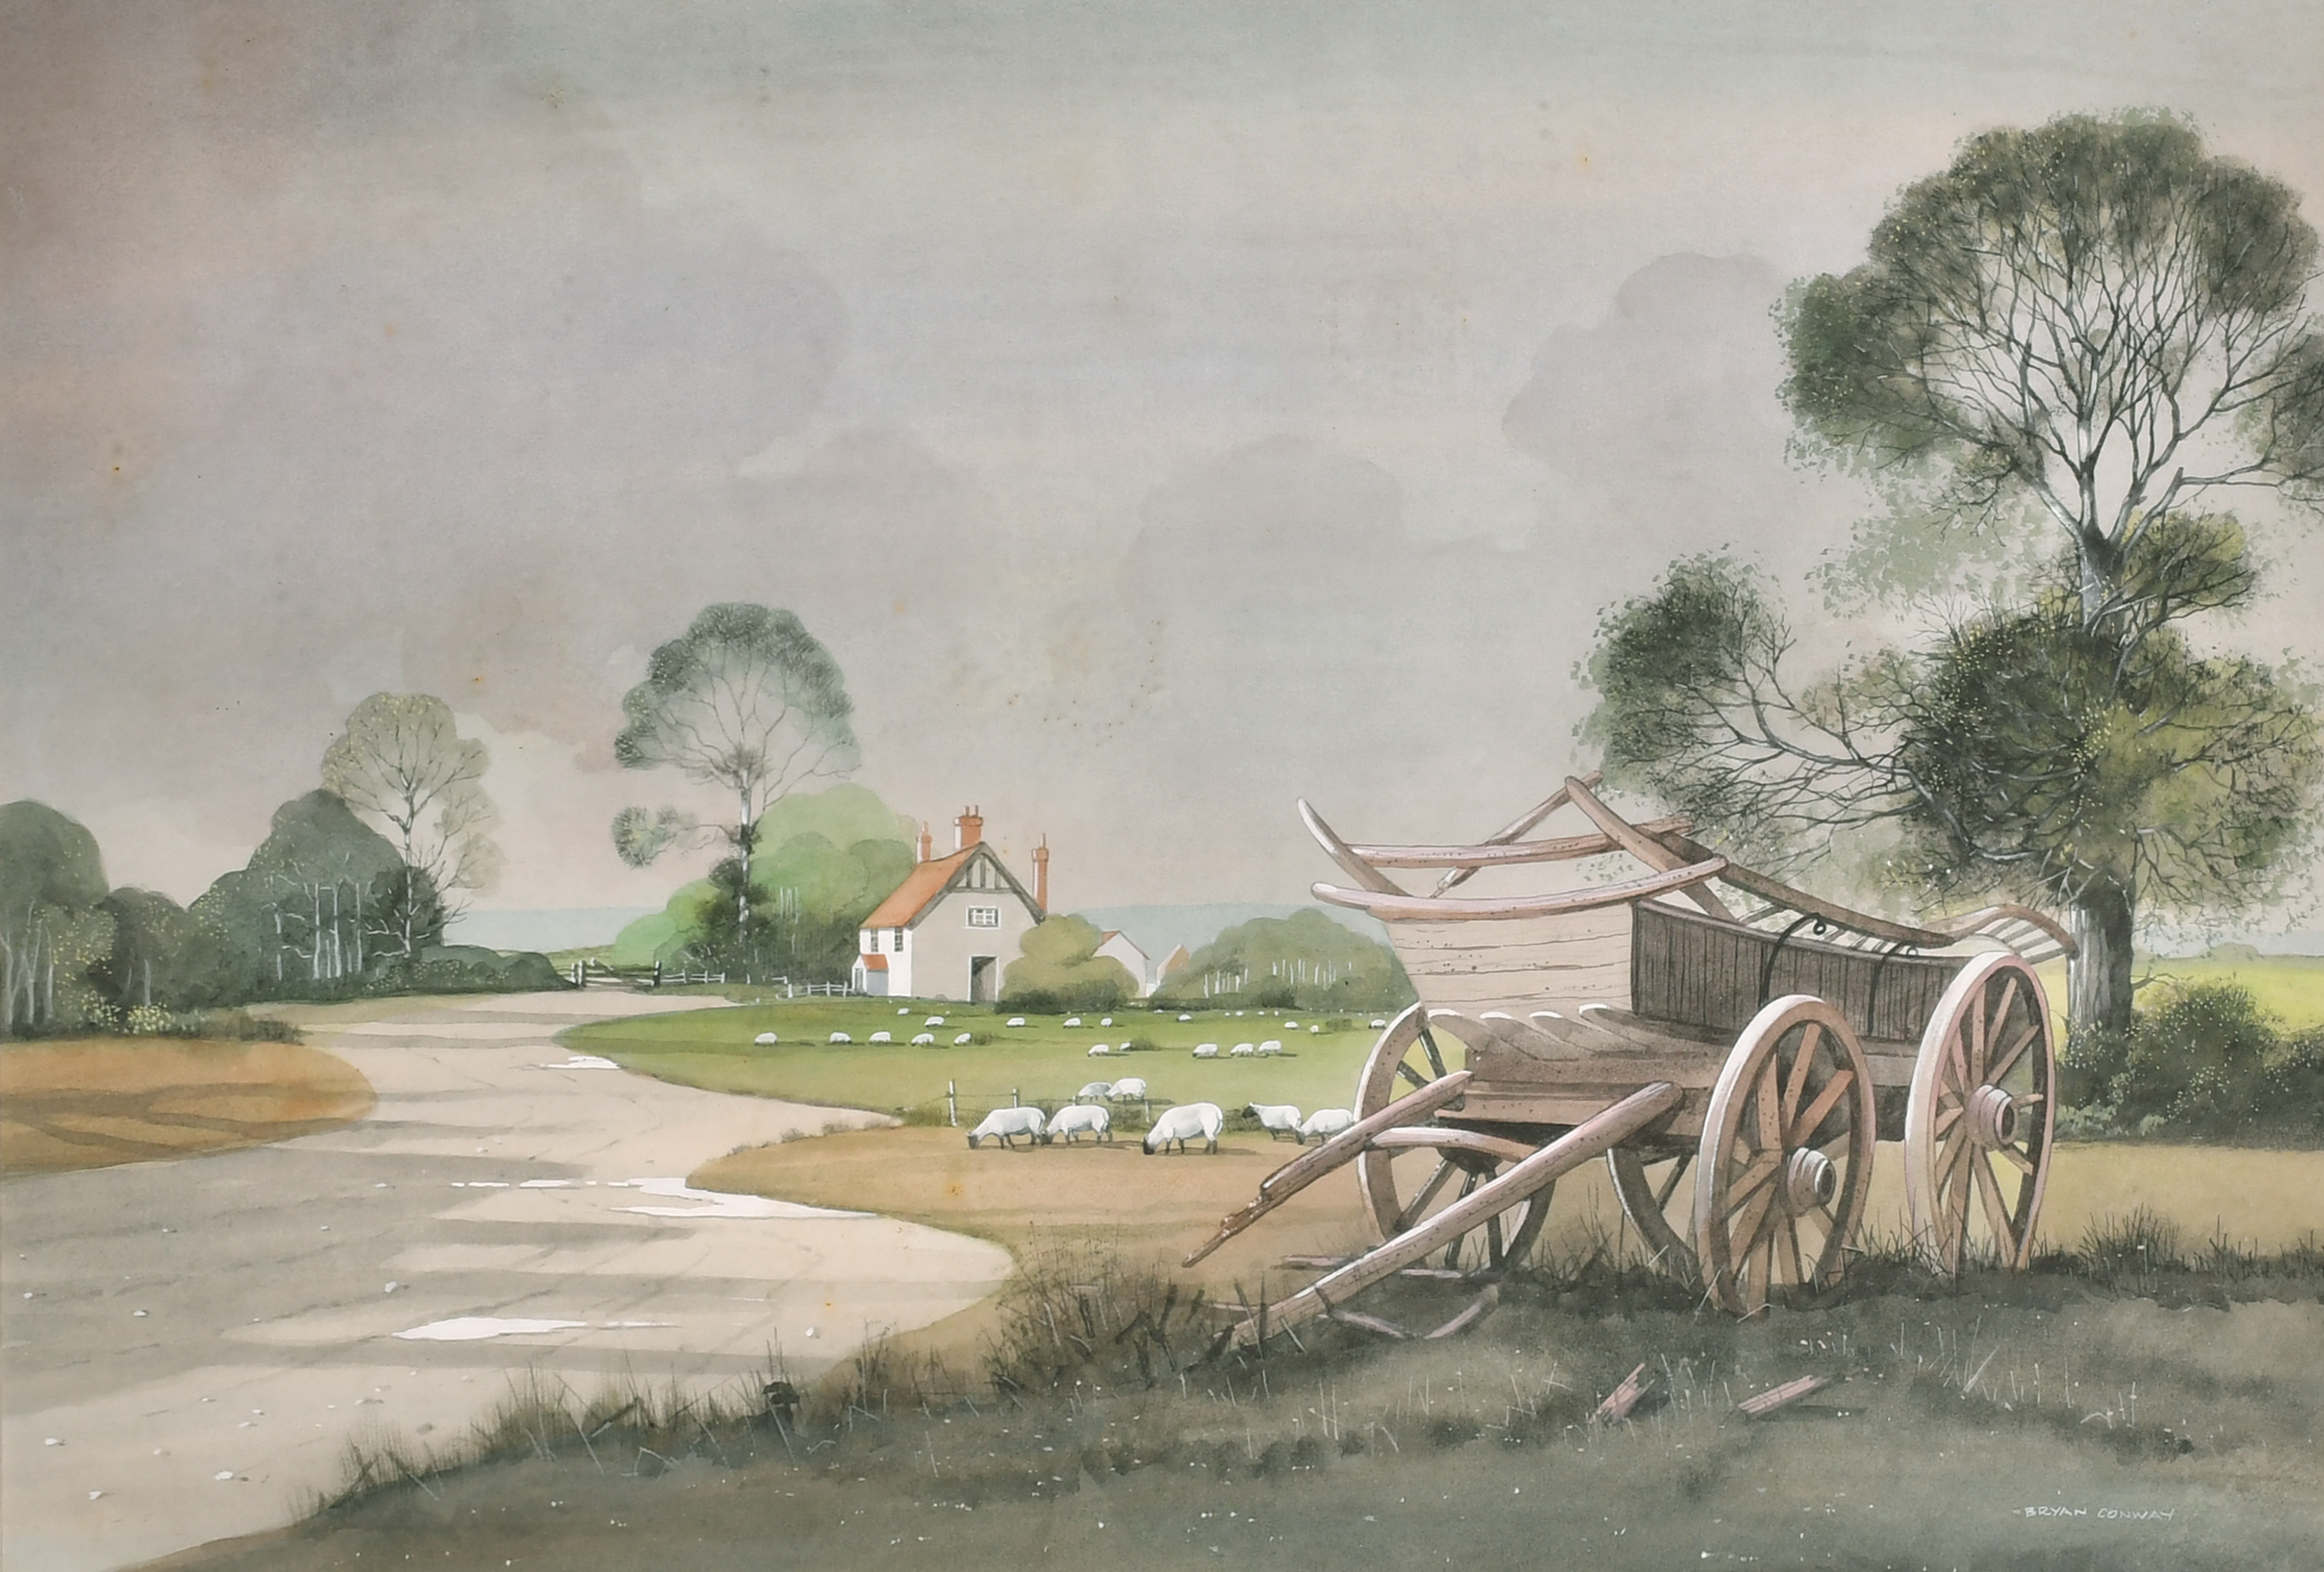 Bryan Conway (20th-21st Century) British. "The Broken Wagon", Watercolour, Signed, 14.25" x 21.